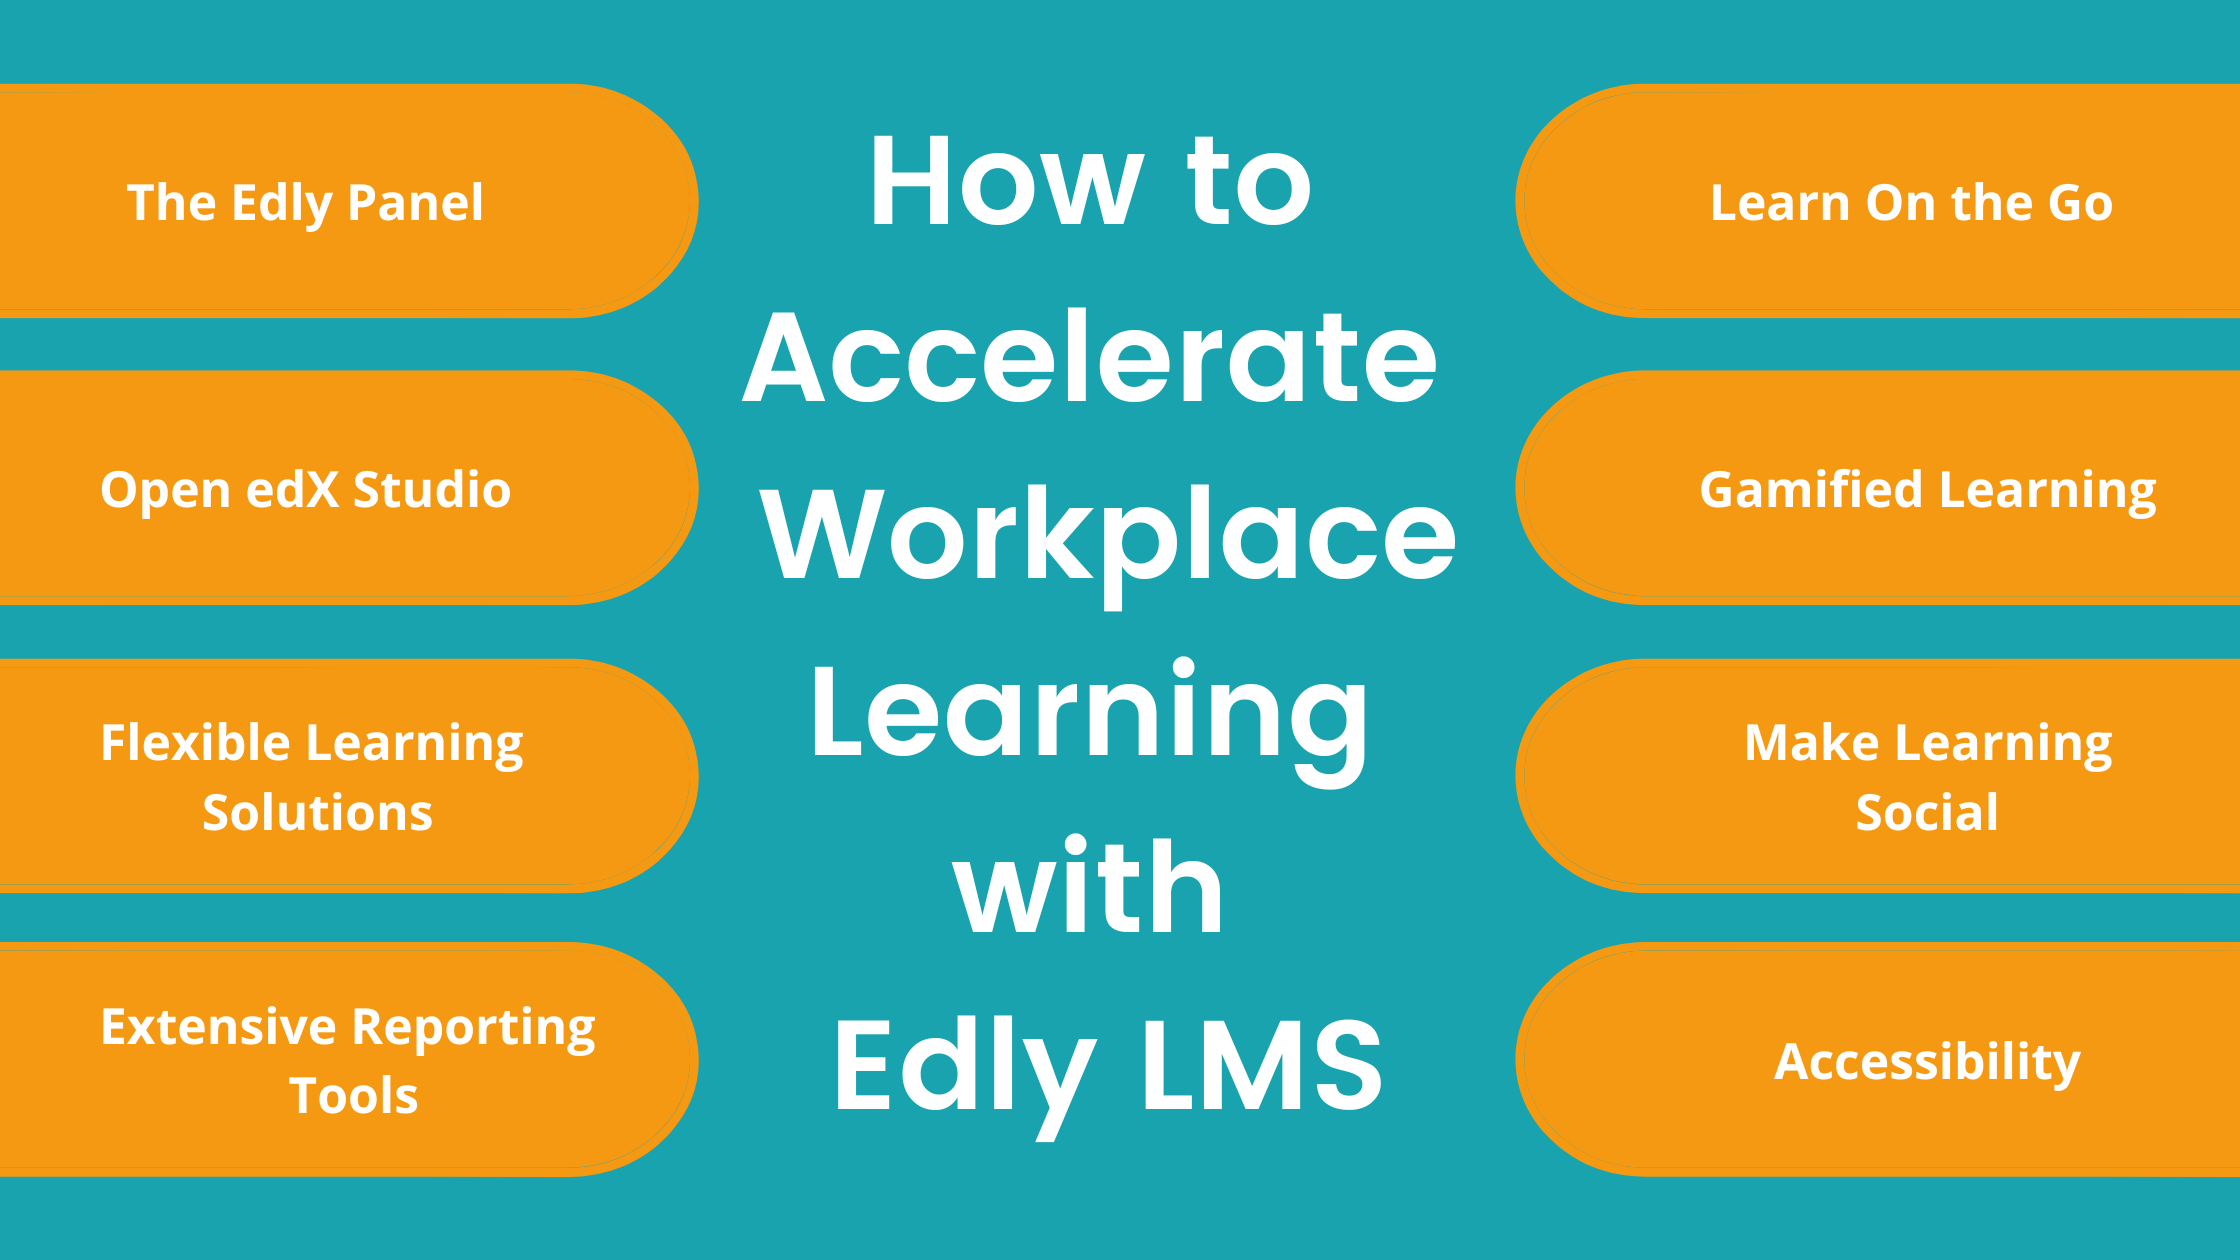 How to Accelerate Workplace Learning with Edly LMS